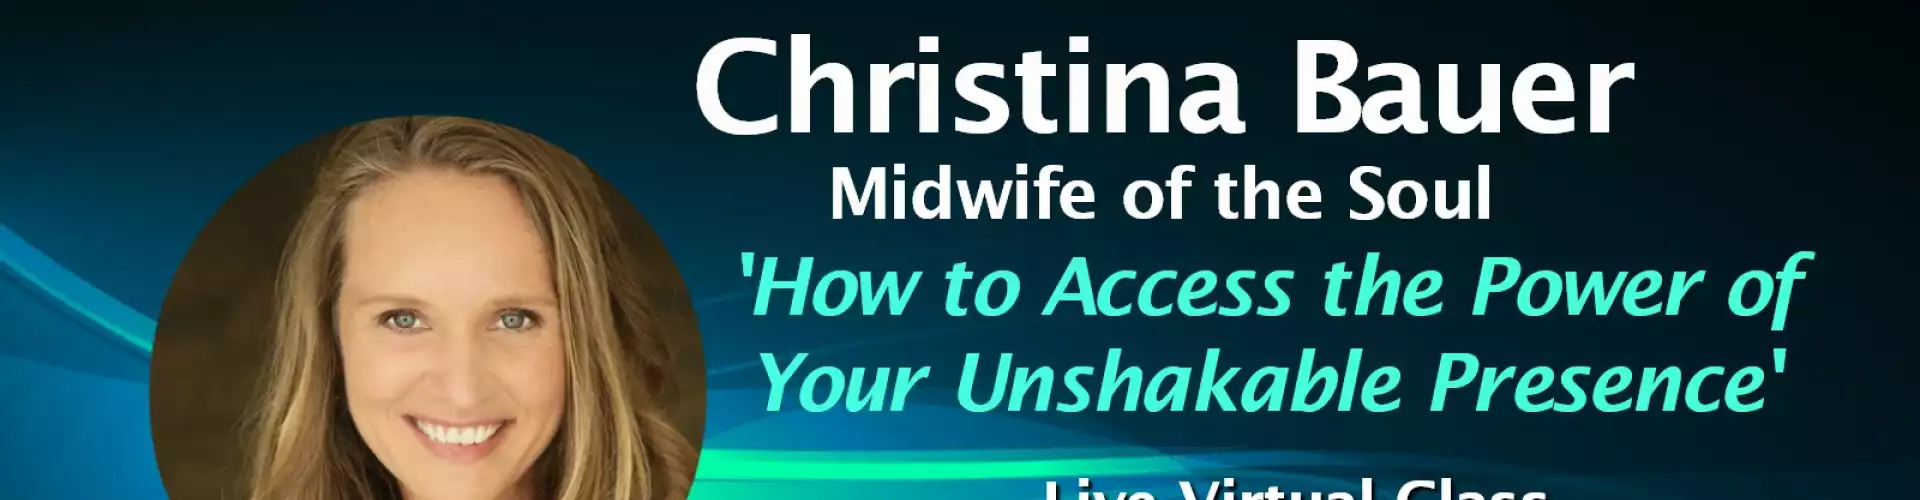 How to Access the Power of Your Unshakable Presence  w WU Featured Expert Christina Bauer